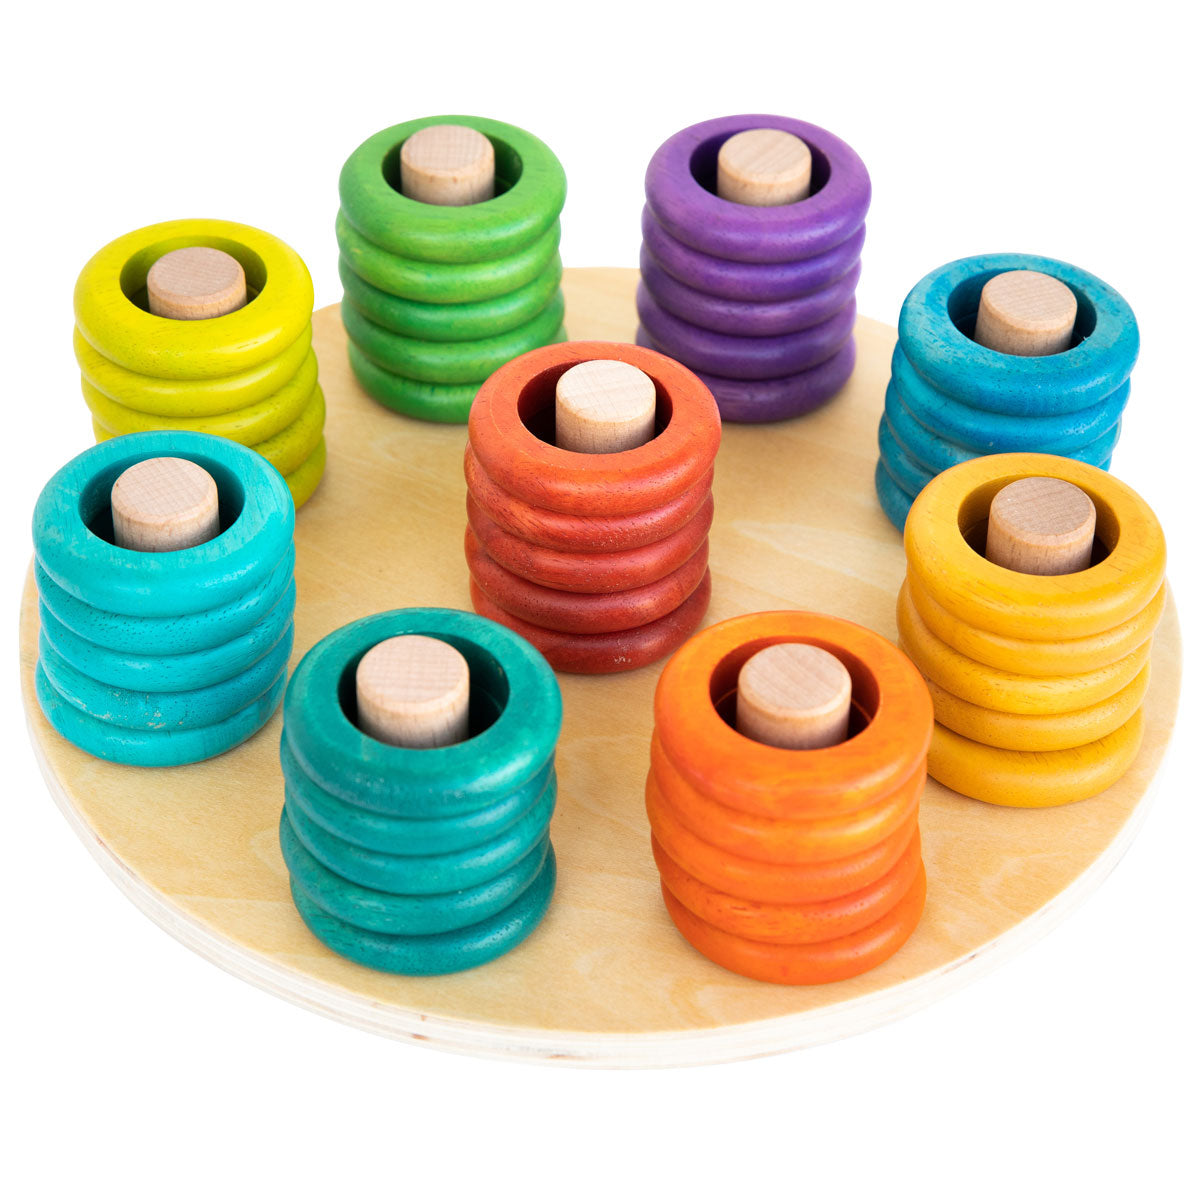 Hooping Rings, Introducing our Hooping Rings 9-piece wooden ring set, designed to inspire creativity and learning in young children! The Hooping Rings set is made from sustainably sourced beech wood, rubber wood, and plywood, this set is both durable and eco-friendly.Featuring 5 rings in each bright and engaging colour, children can use their imaginations to stack the rings in order, create patterns, or even come up with their own designs. The possibilities are endless with this open-ended set!Not only is t